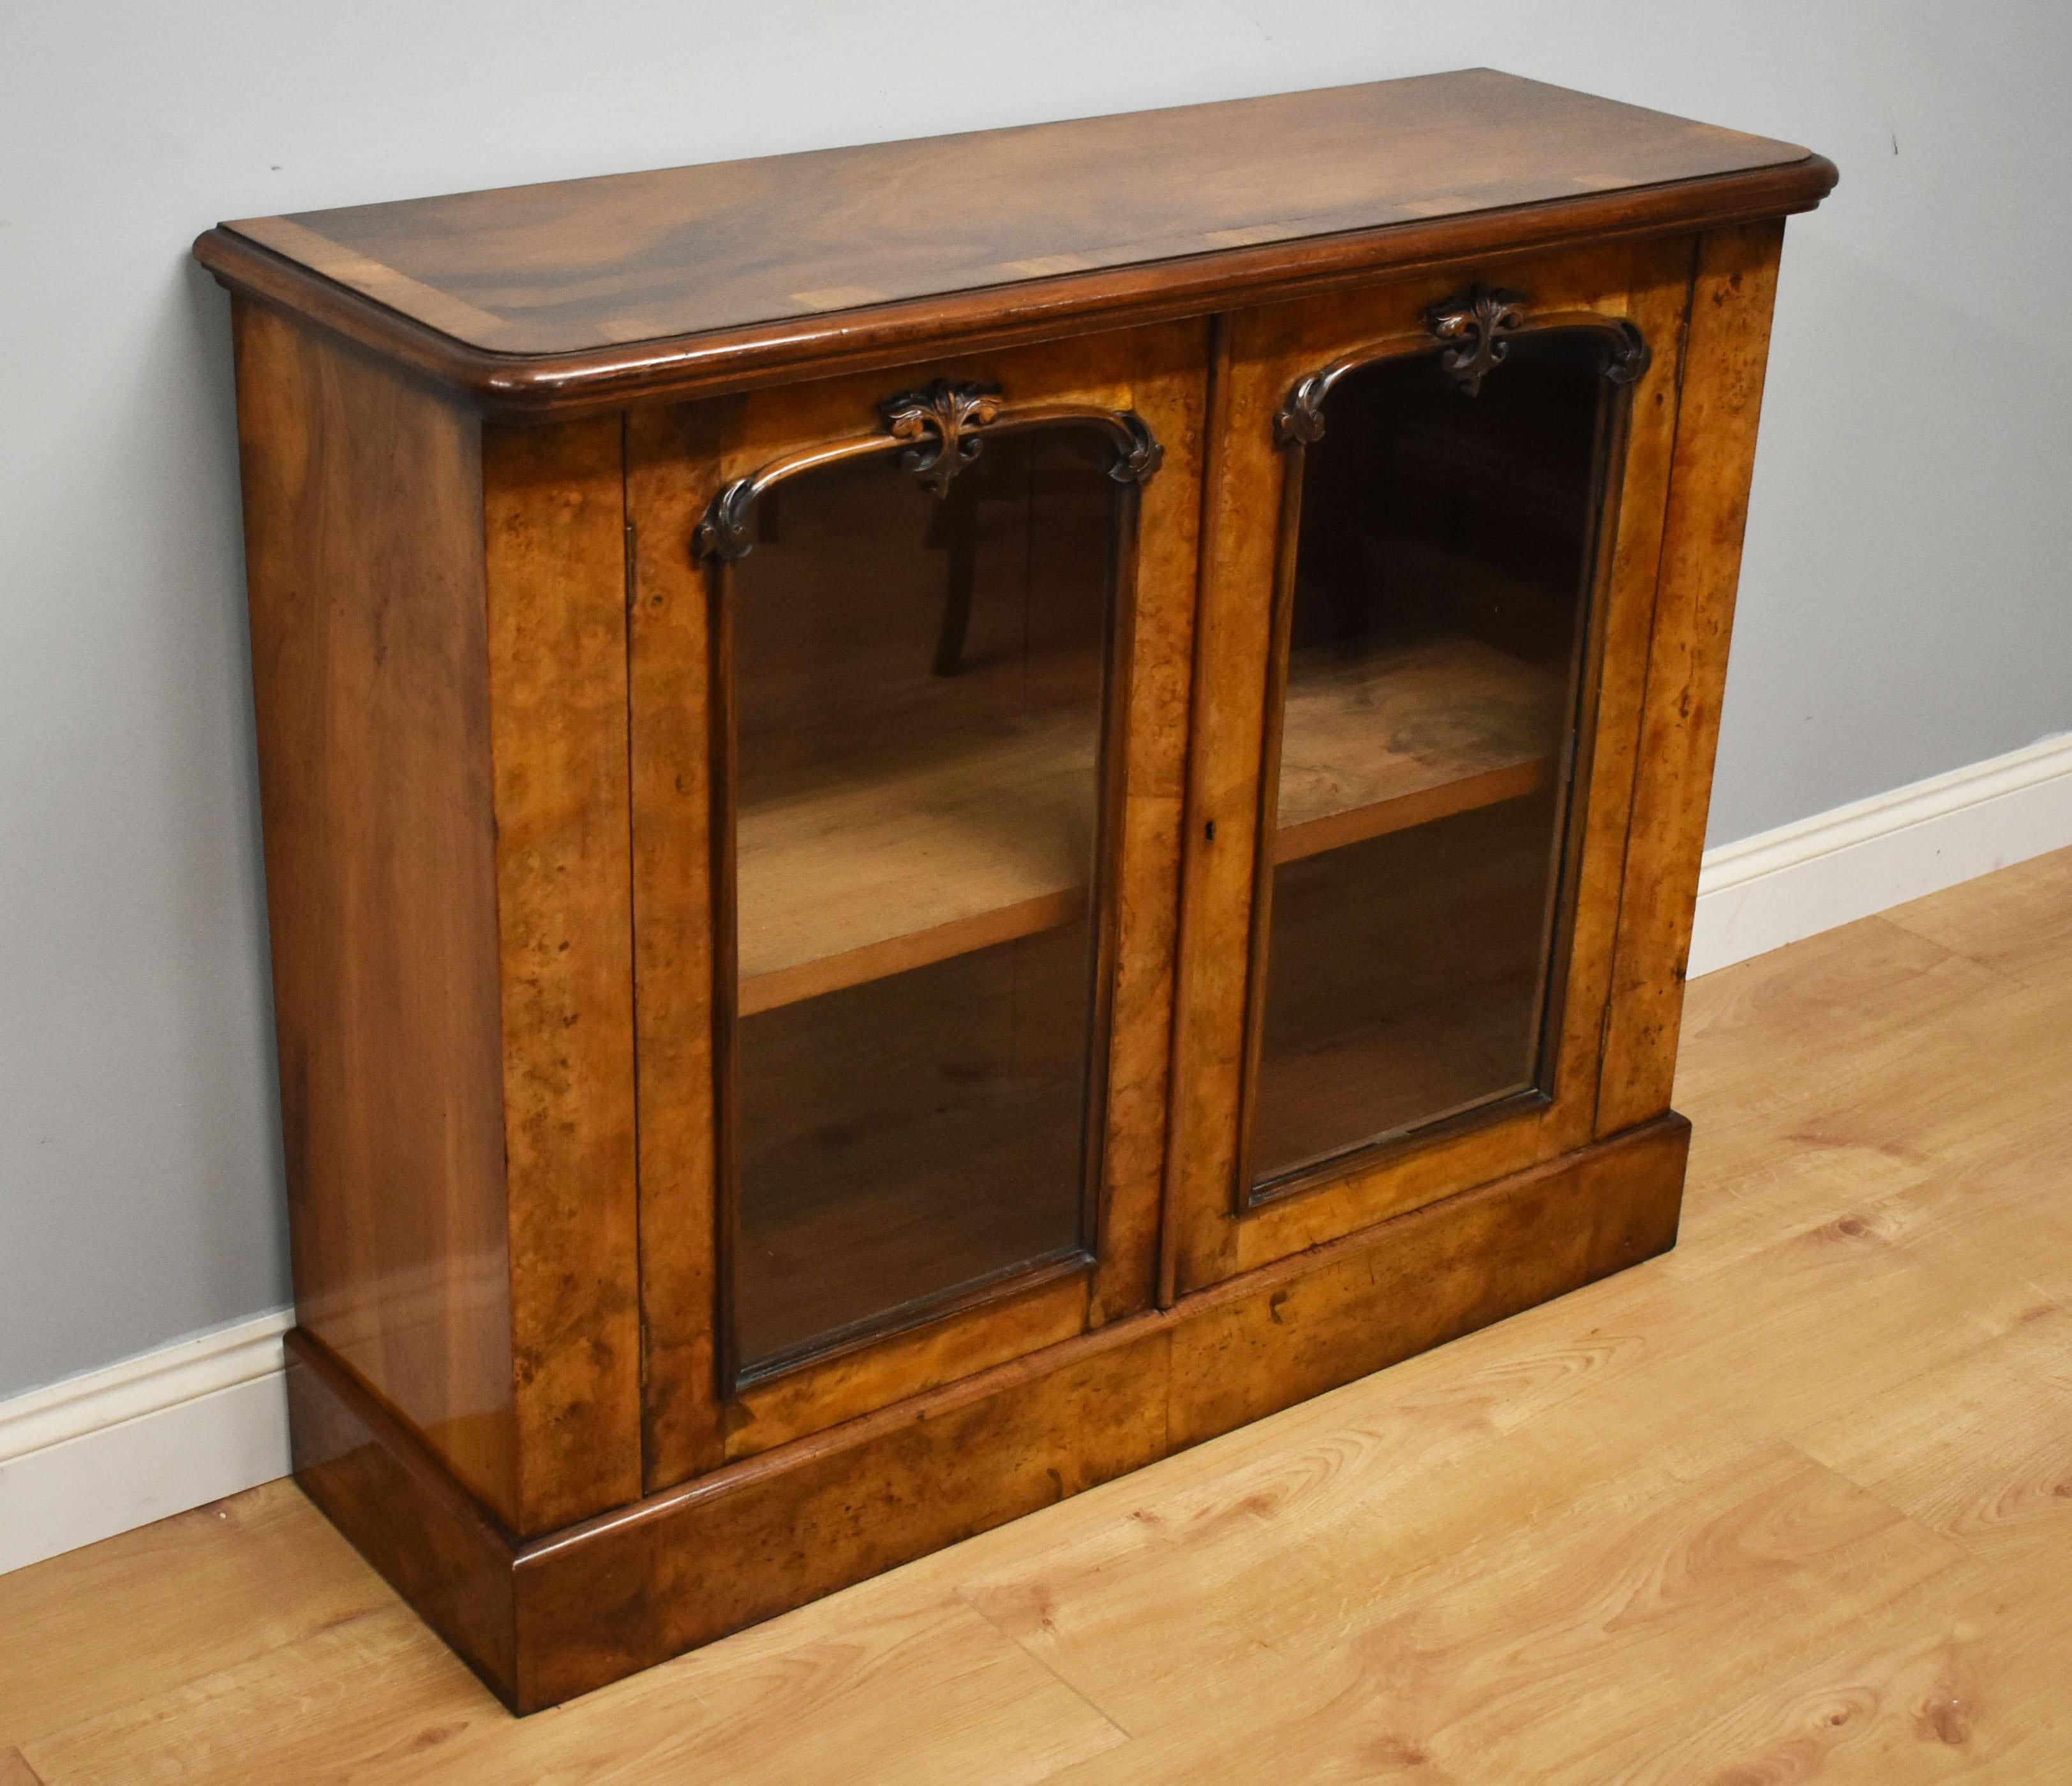 For sale is a good quality Victorian burr walnut cabinet, having a banded top above two glazed doors, opening to reveal a single shelf. The cabinet stands on a plinth base and is in very good condition for its age. 

Measures: Width 42